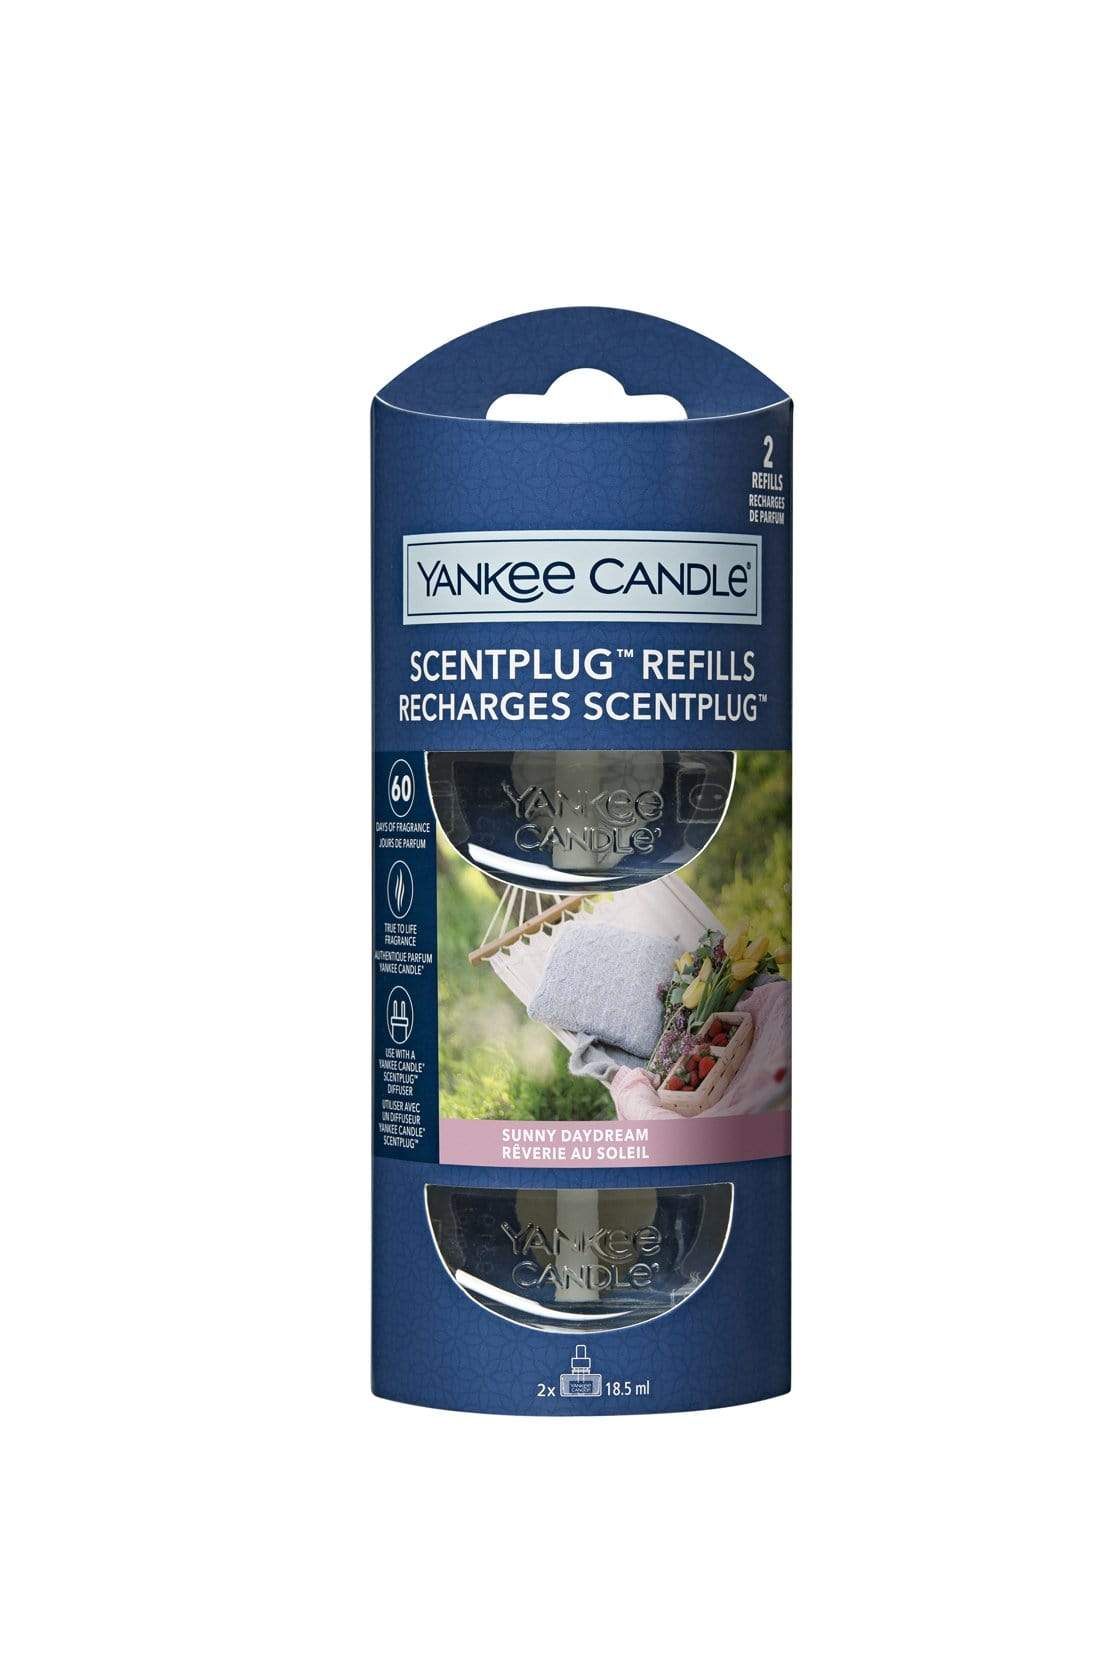 Yankee Candle Plug In Refill Yankee Candle Scentplug Refill Twin Pack - Sunny Daydream